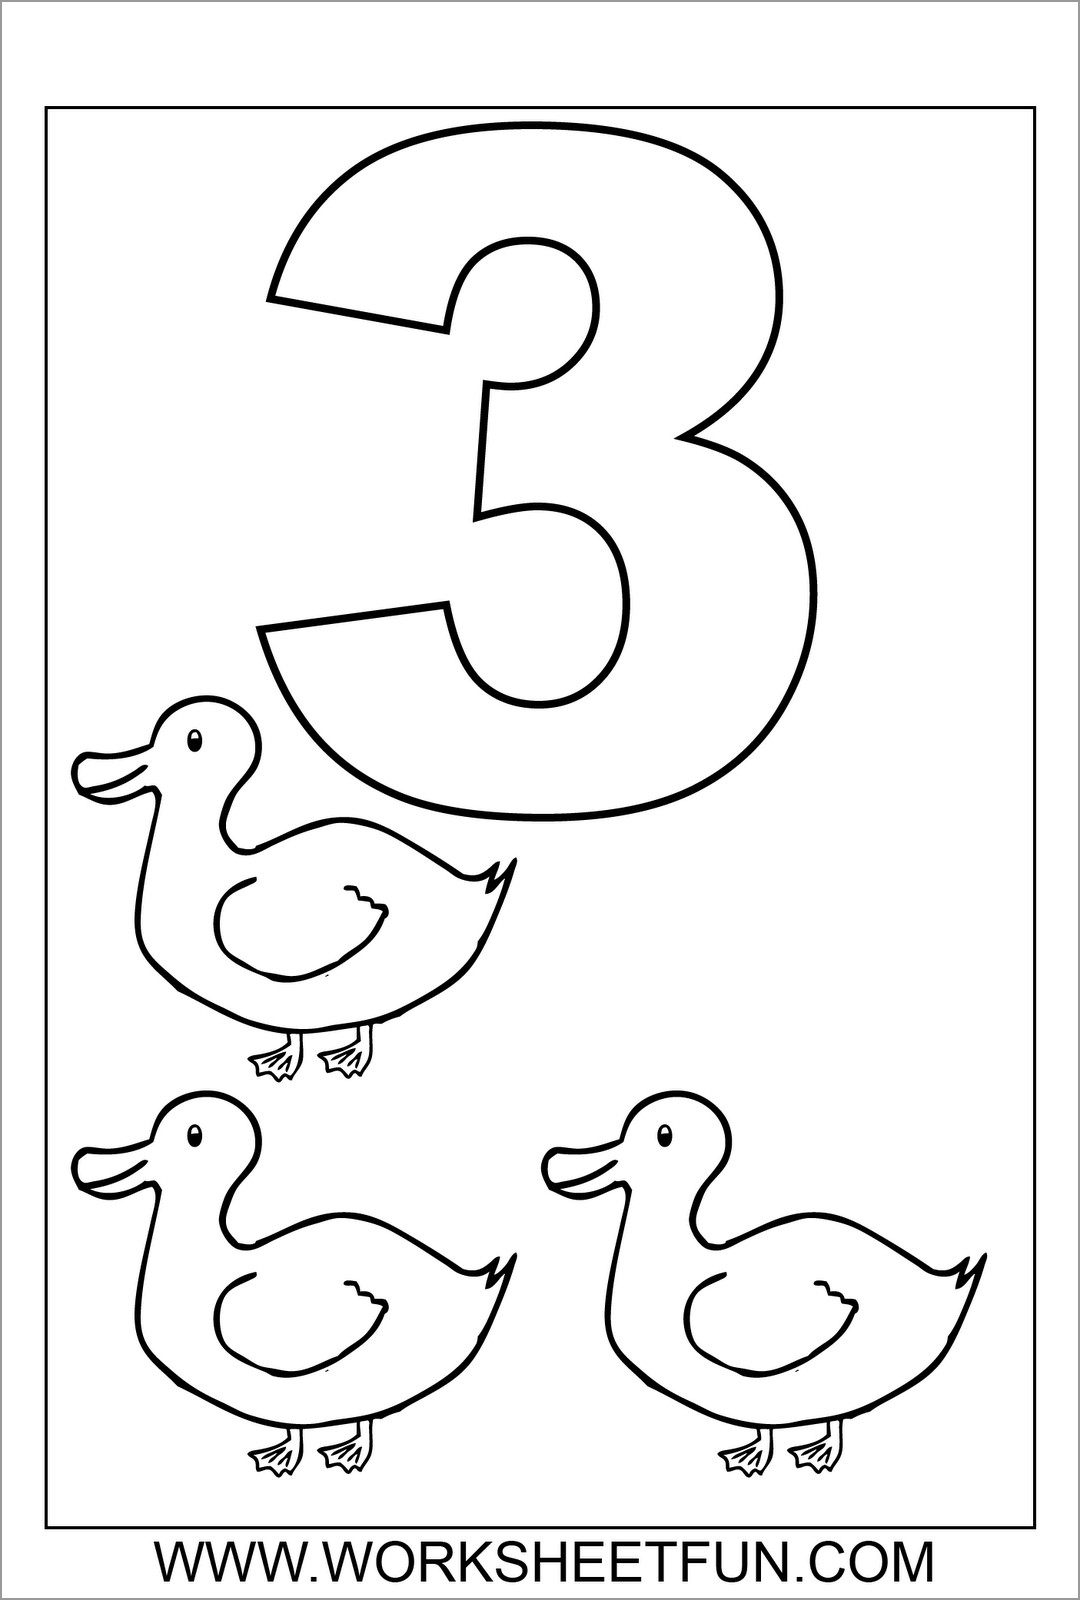 3 Ducks Coloring Page